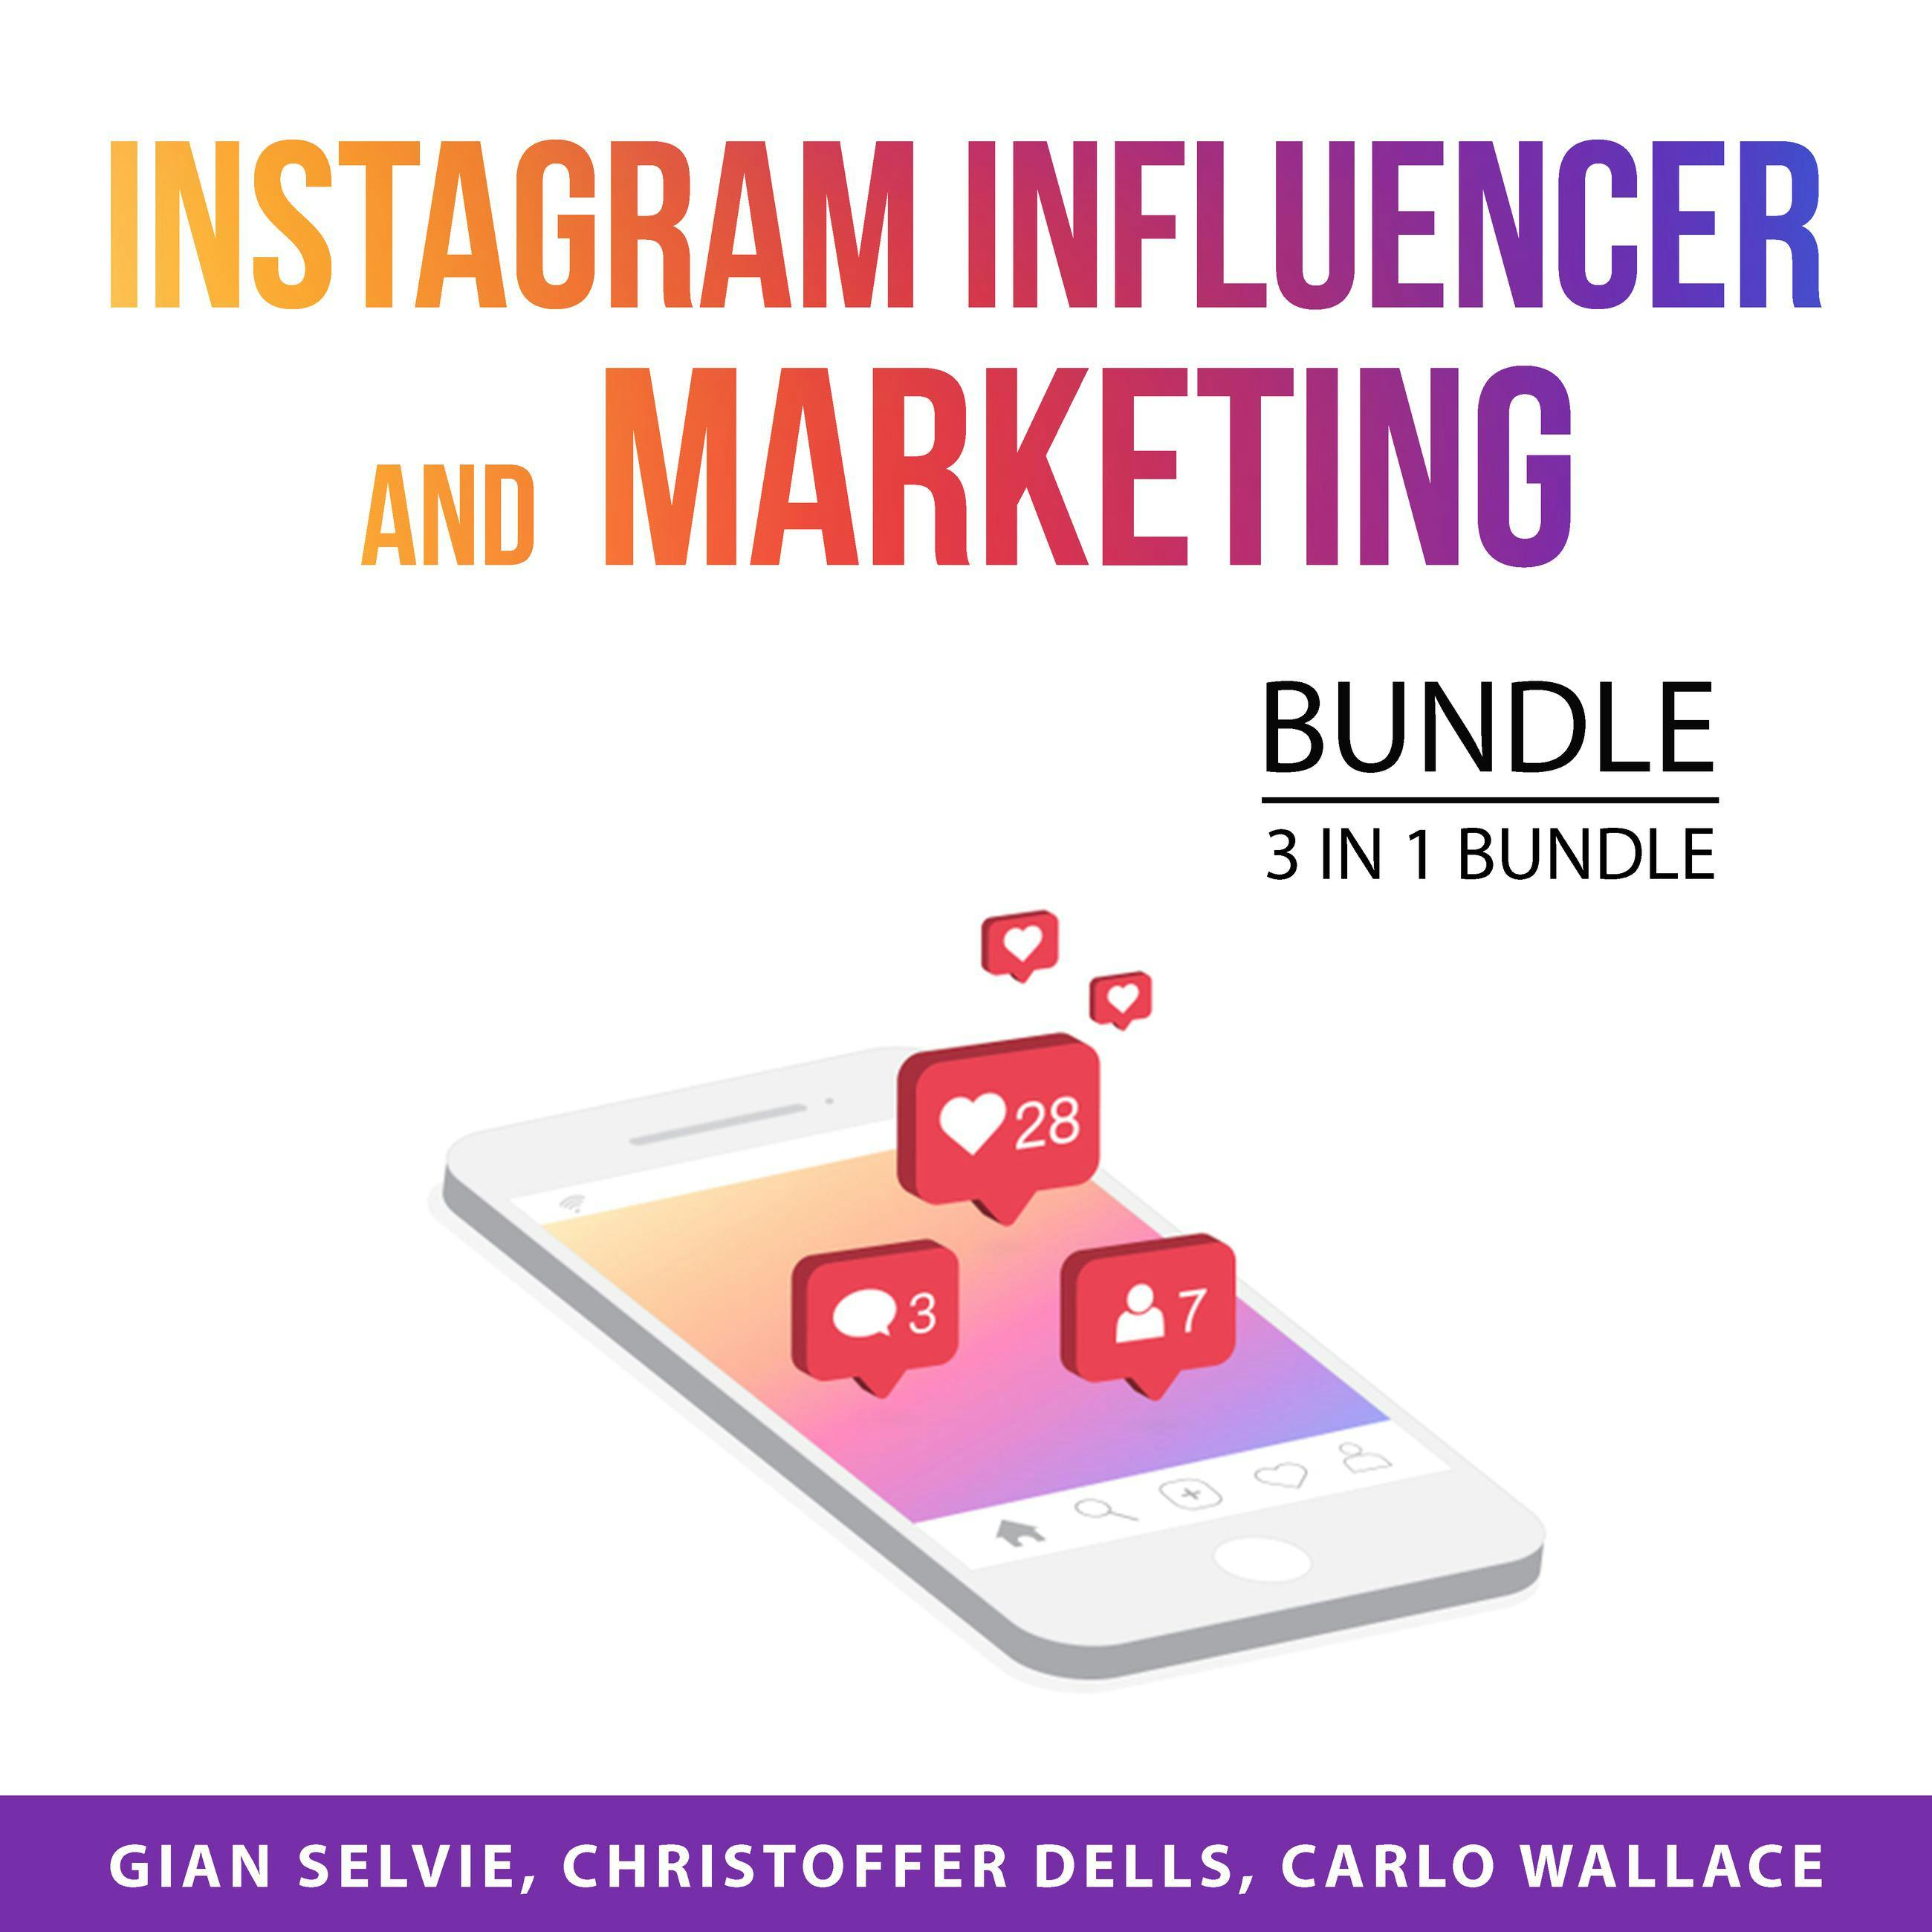 Instagram Influencer and Marketing Bundle, 3 in 1 Bundle: Become an Instagram Influencer, Art of Influencer Marketing, and Road to Millions of Followers - undefined